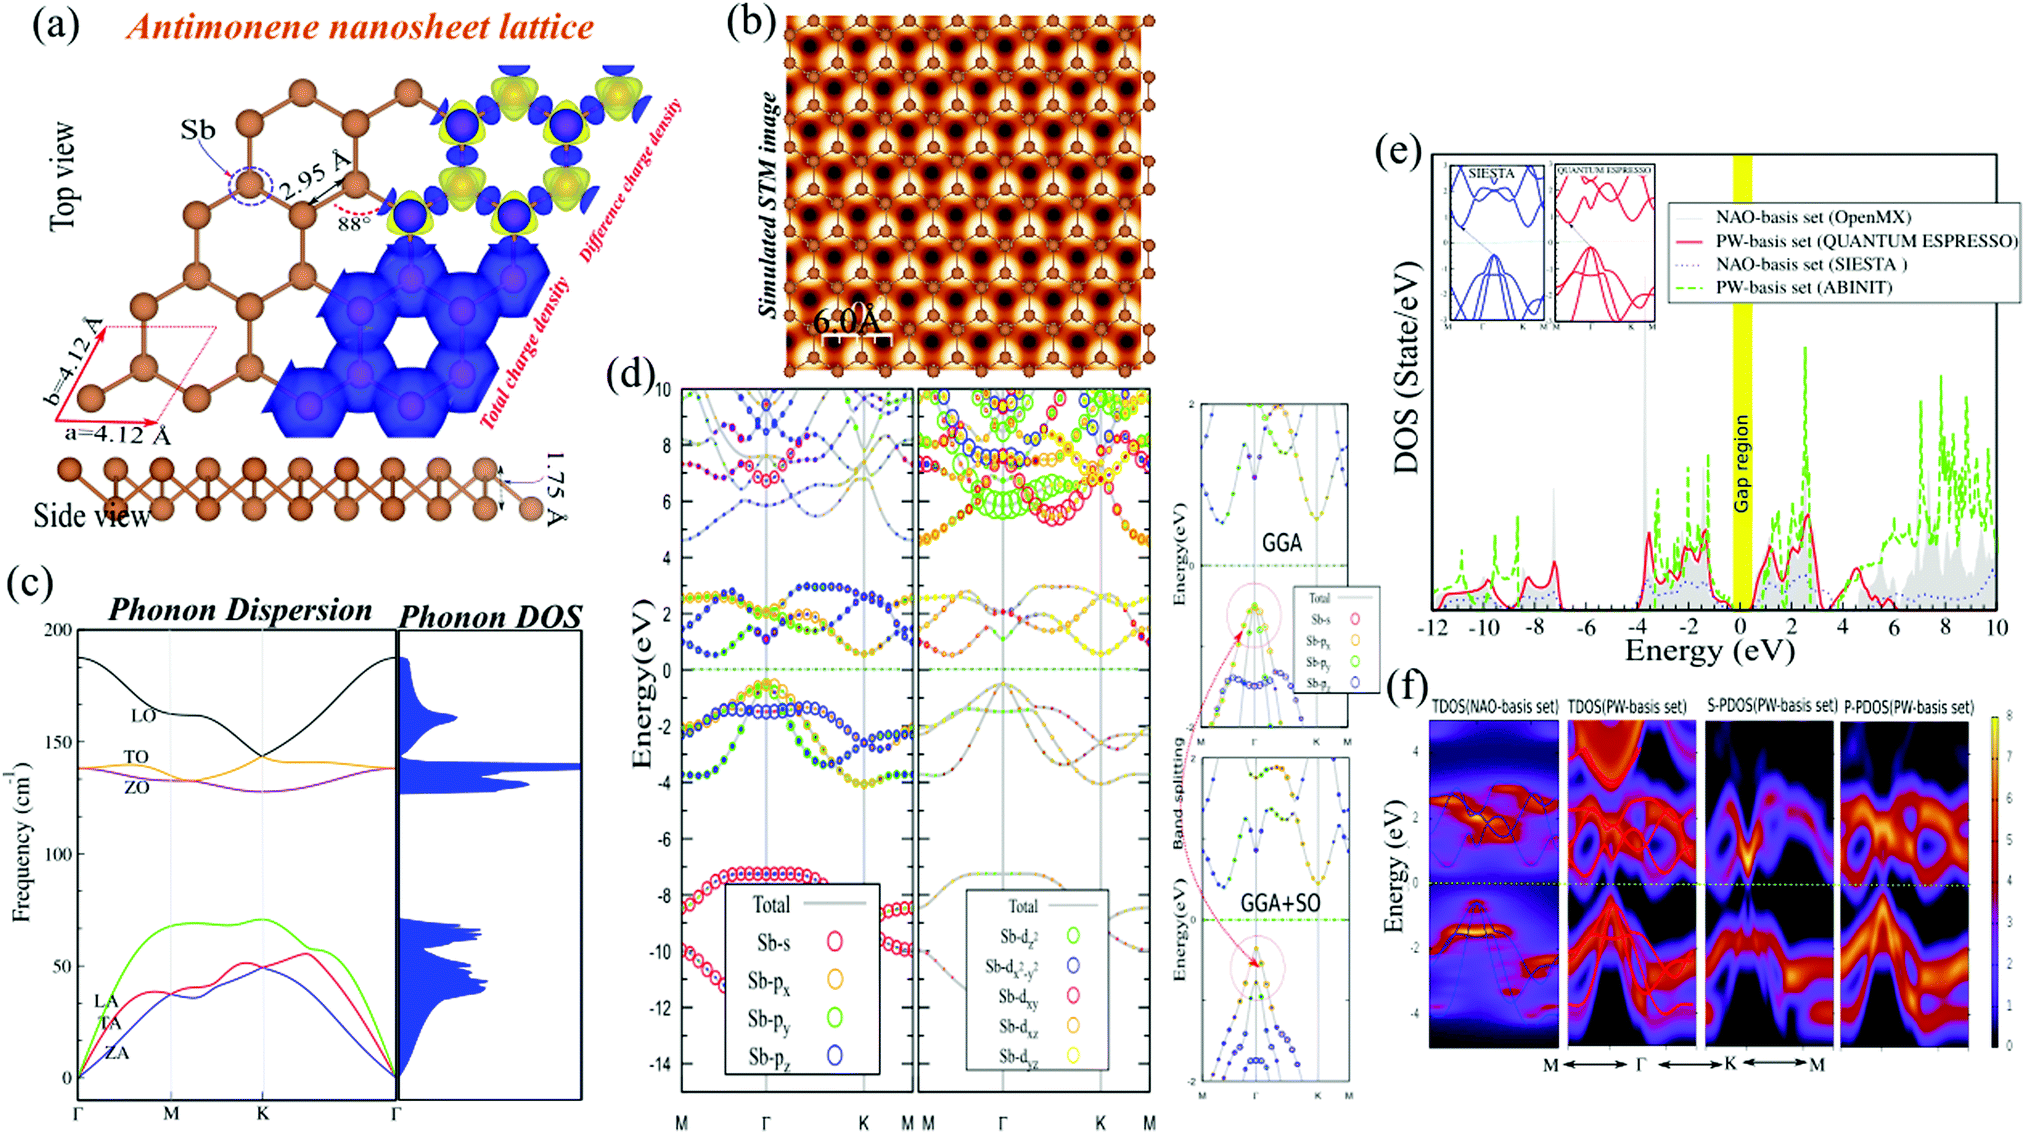 Tuning The Electronic And Magnetic Properties Of Antimonene Nanosheets Via Point Defects And External Fields First Principles Calculations Physical Chemistry Chemical Physics Rsc Publishing